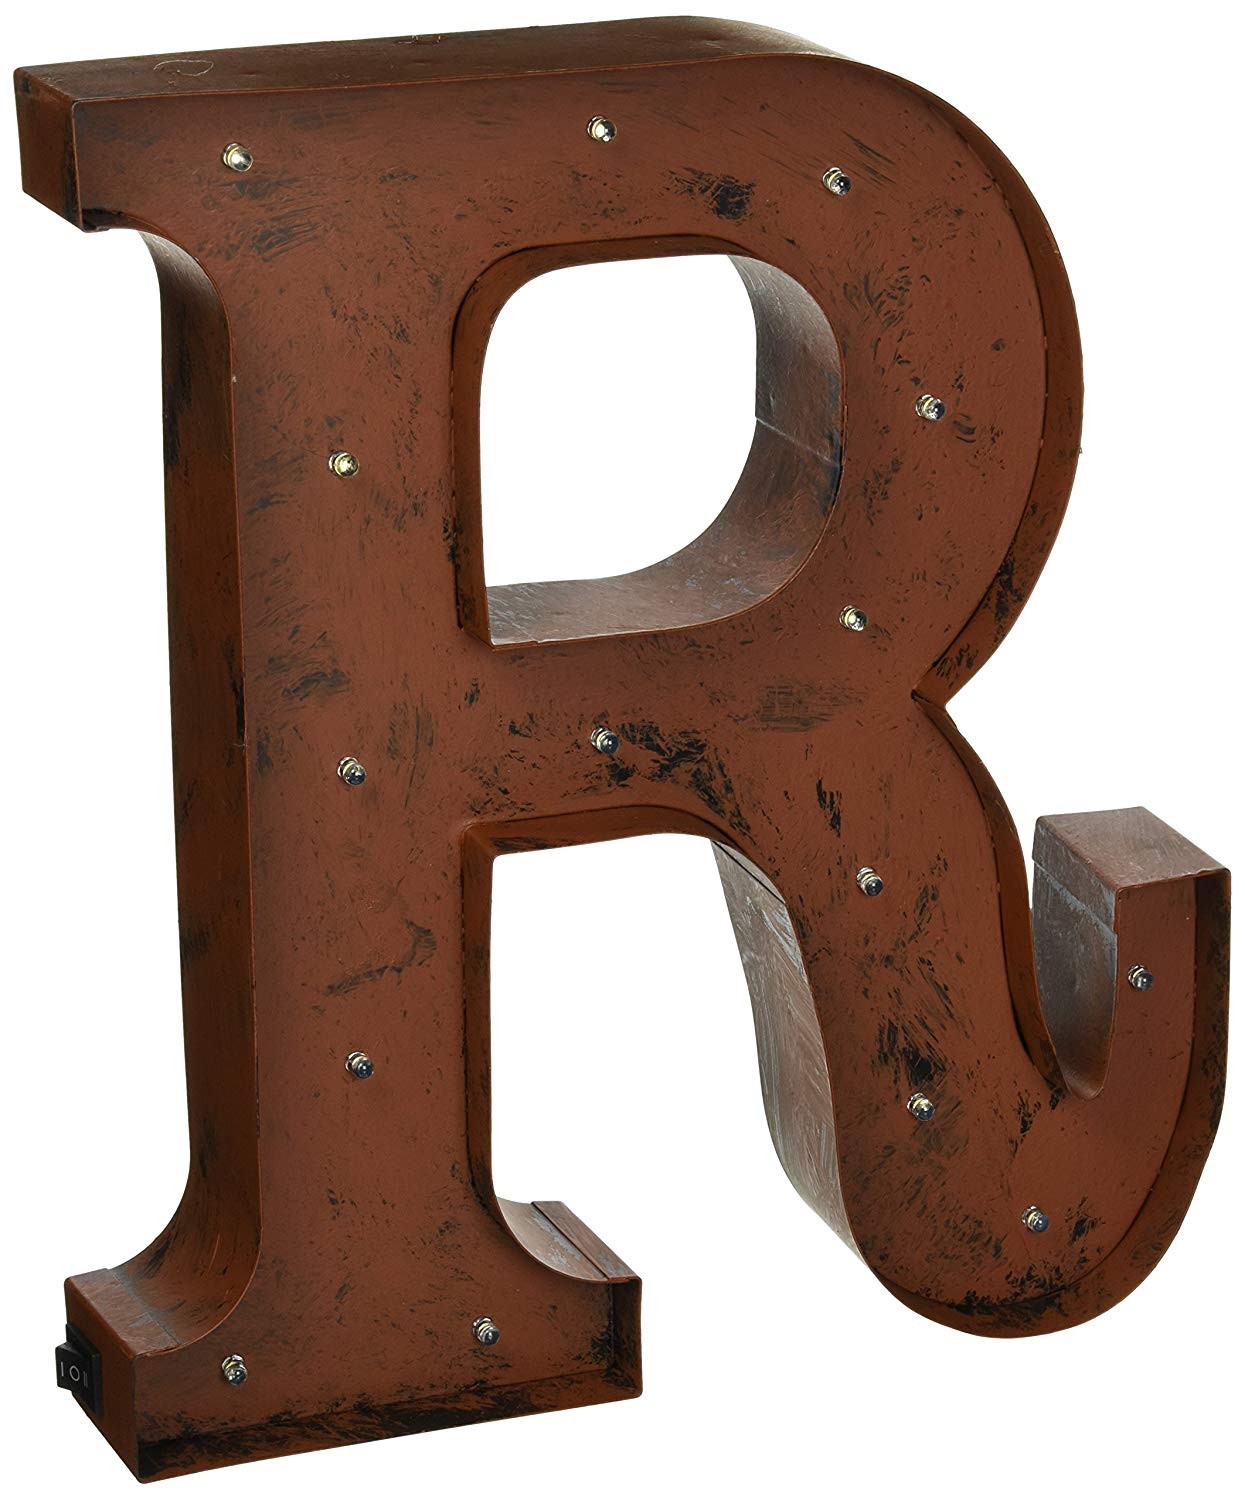 Amazon The Gerson pany "R" LED Lighted Metal Letter with Rustic Brown Finish And Timer Function Home & Kitchen